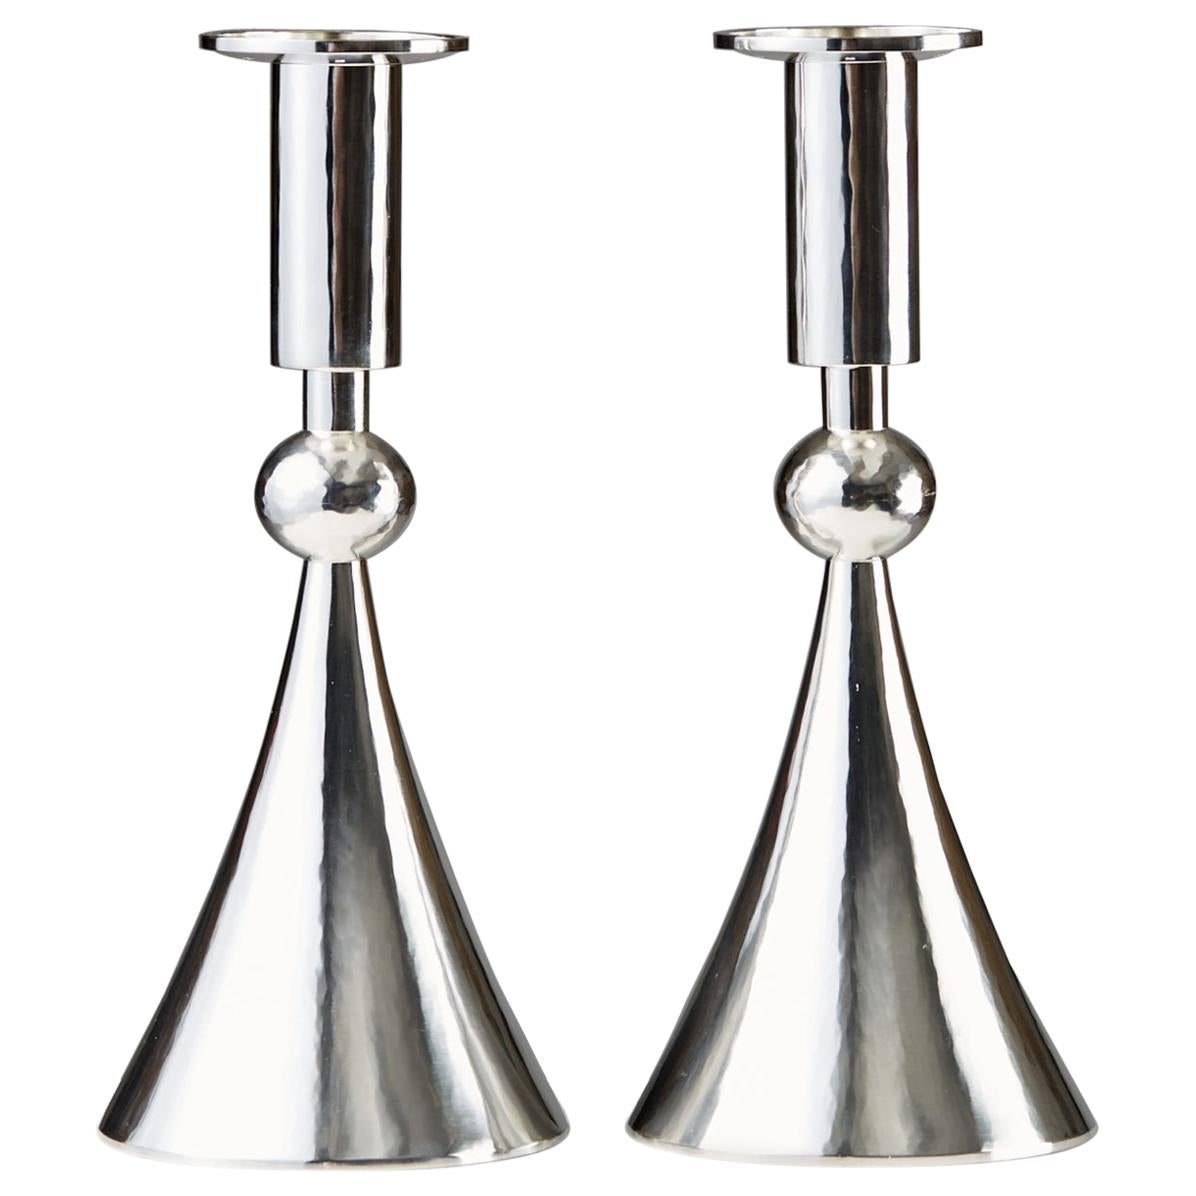 Pair of candlesticks designed by Sigurd Persson,
Sweden. 1964.

Sterling silver.

Measurements: 
H: 21.5 cm/ 8 1/2